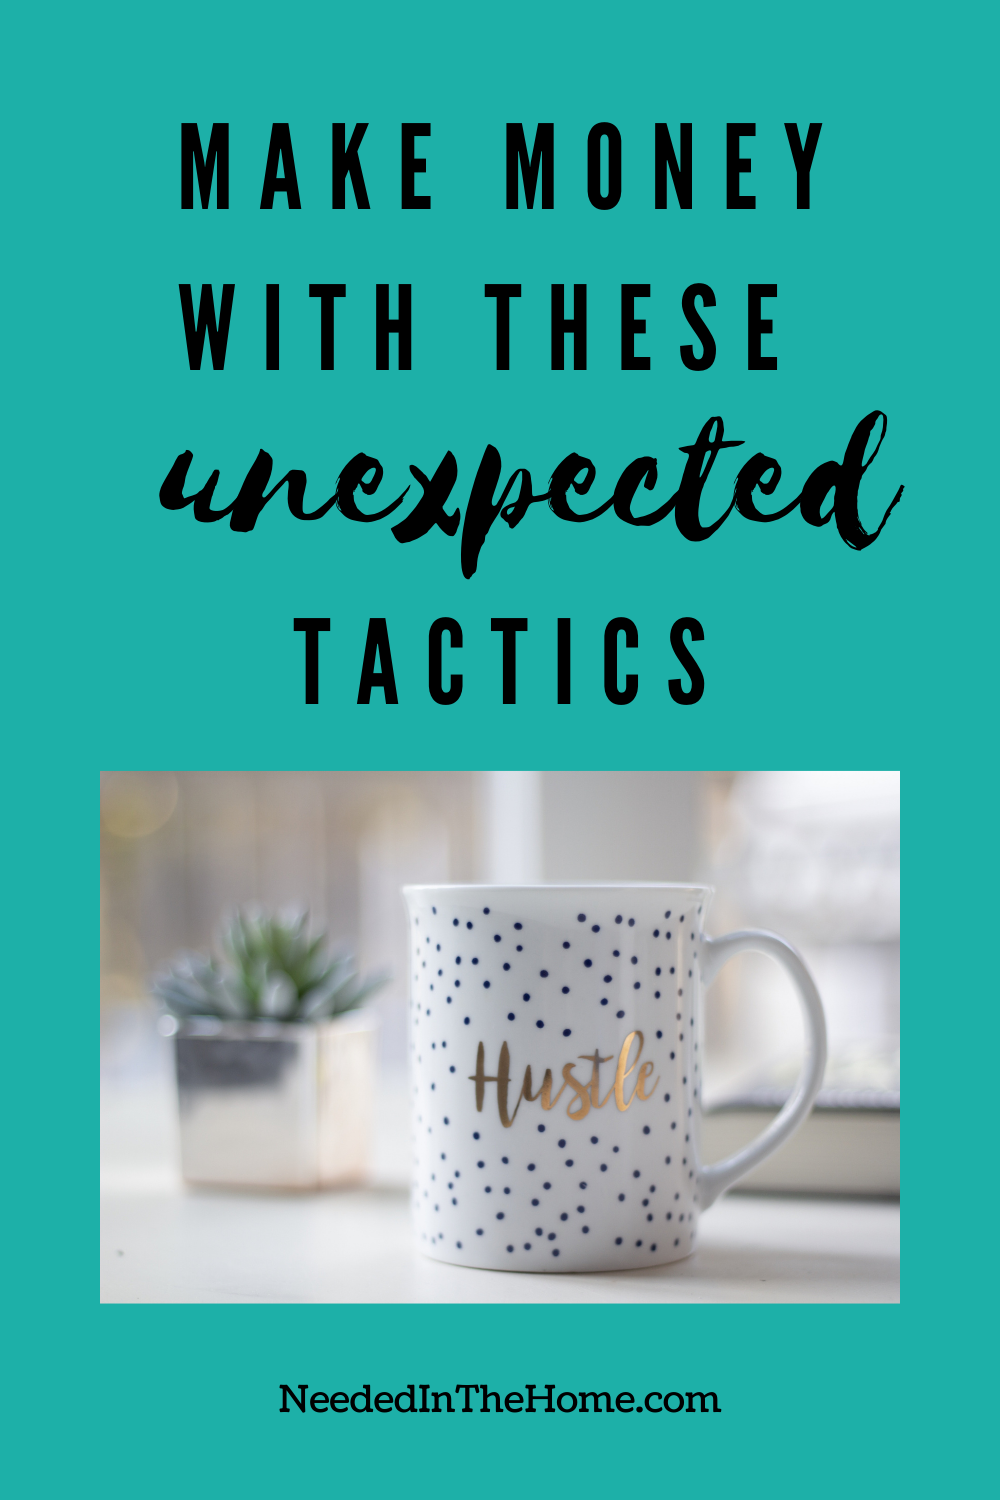 pinterest-pin-description make money with these unexpected tactics mug says hustle neededinthehome